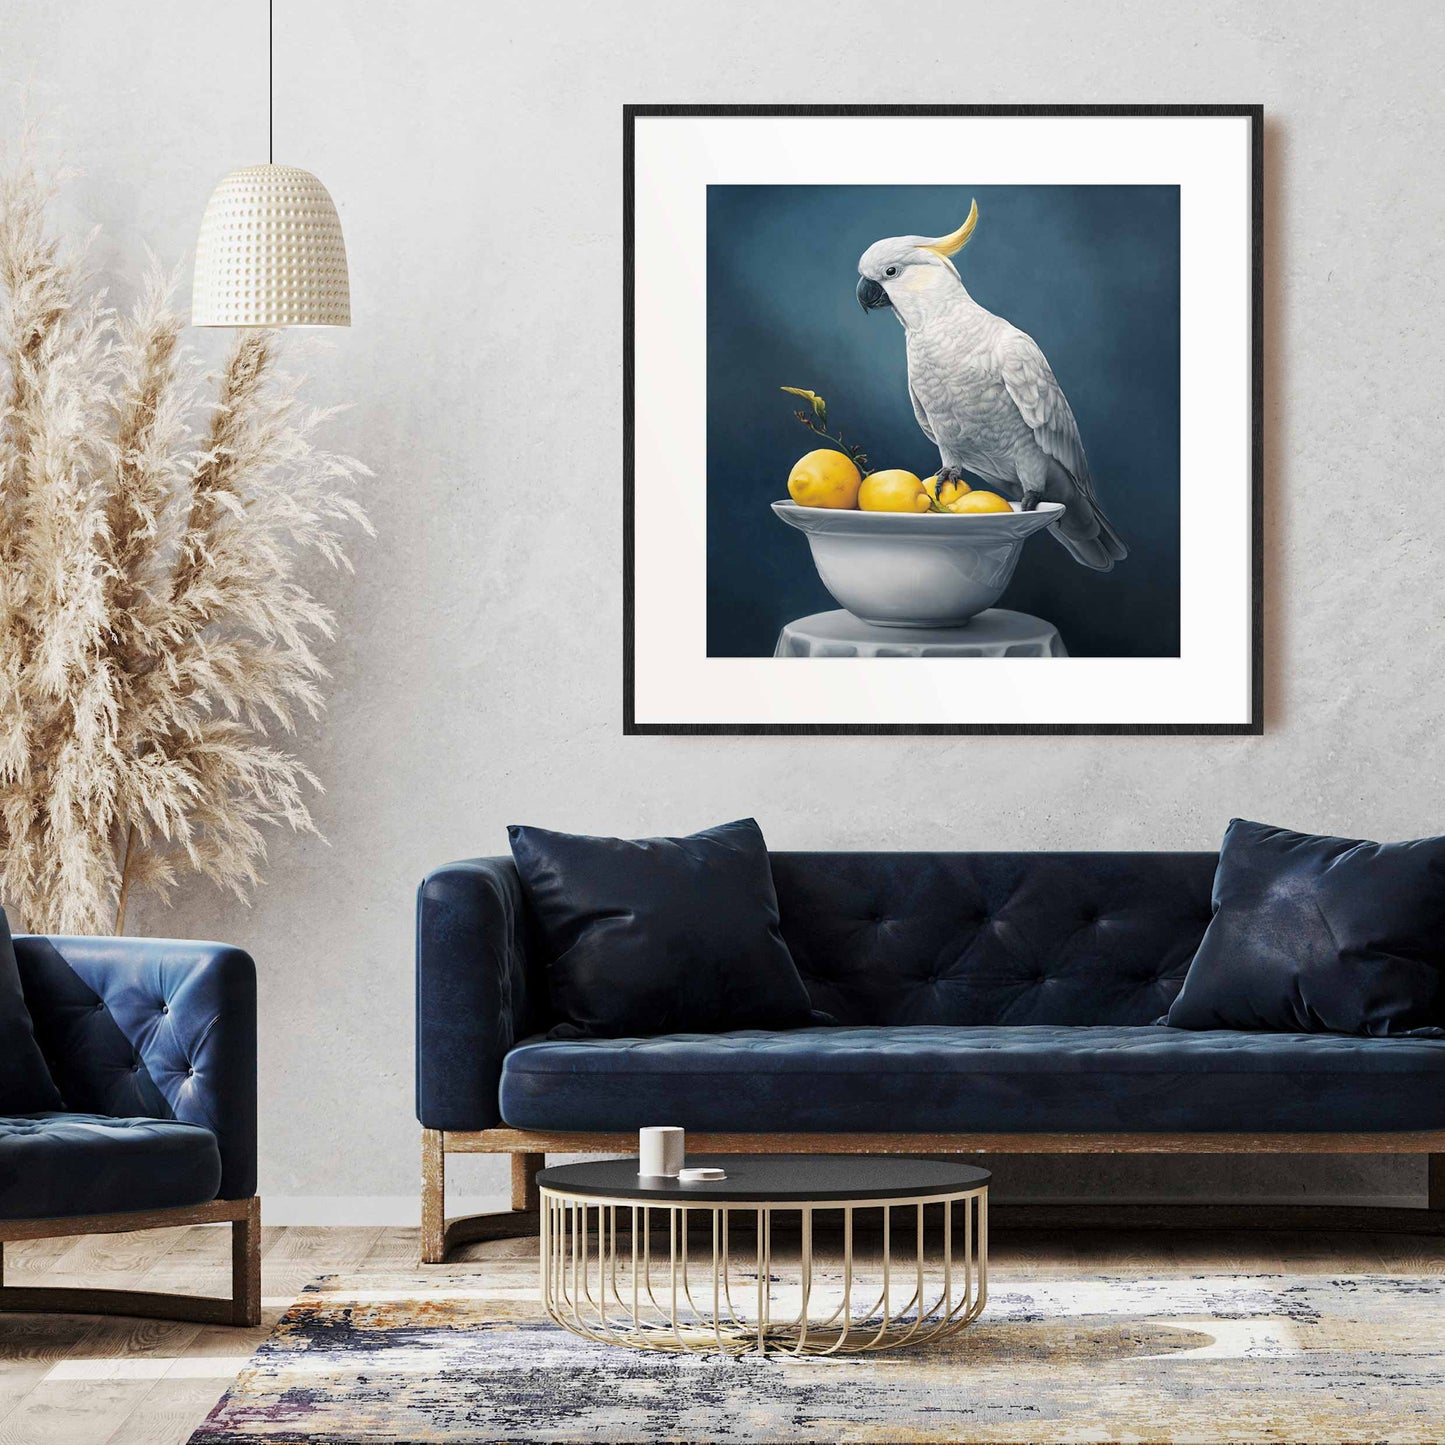 Framed artwork in home of a white cockatoo sitting on a bowl of lemons